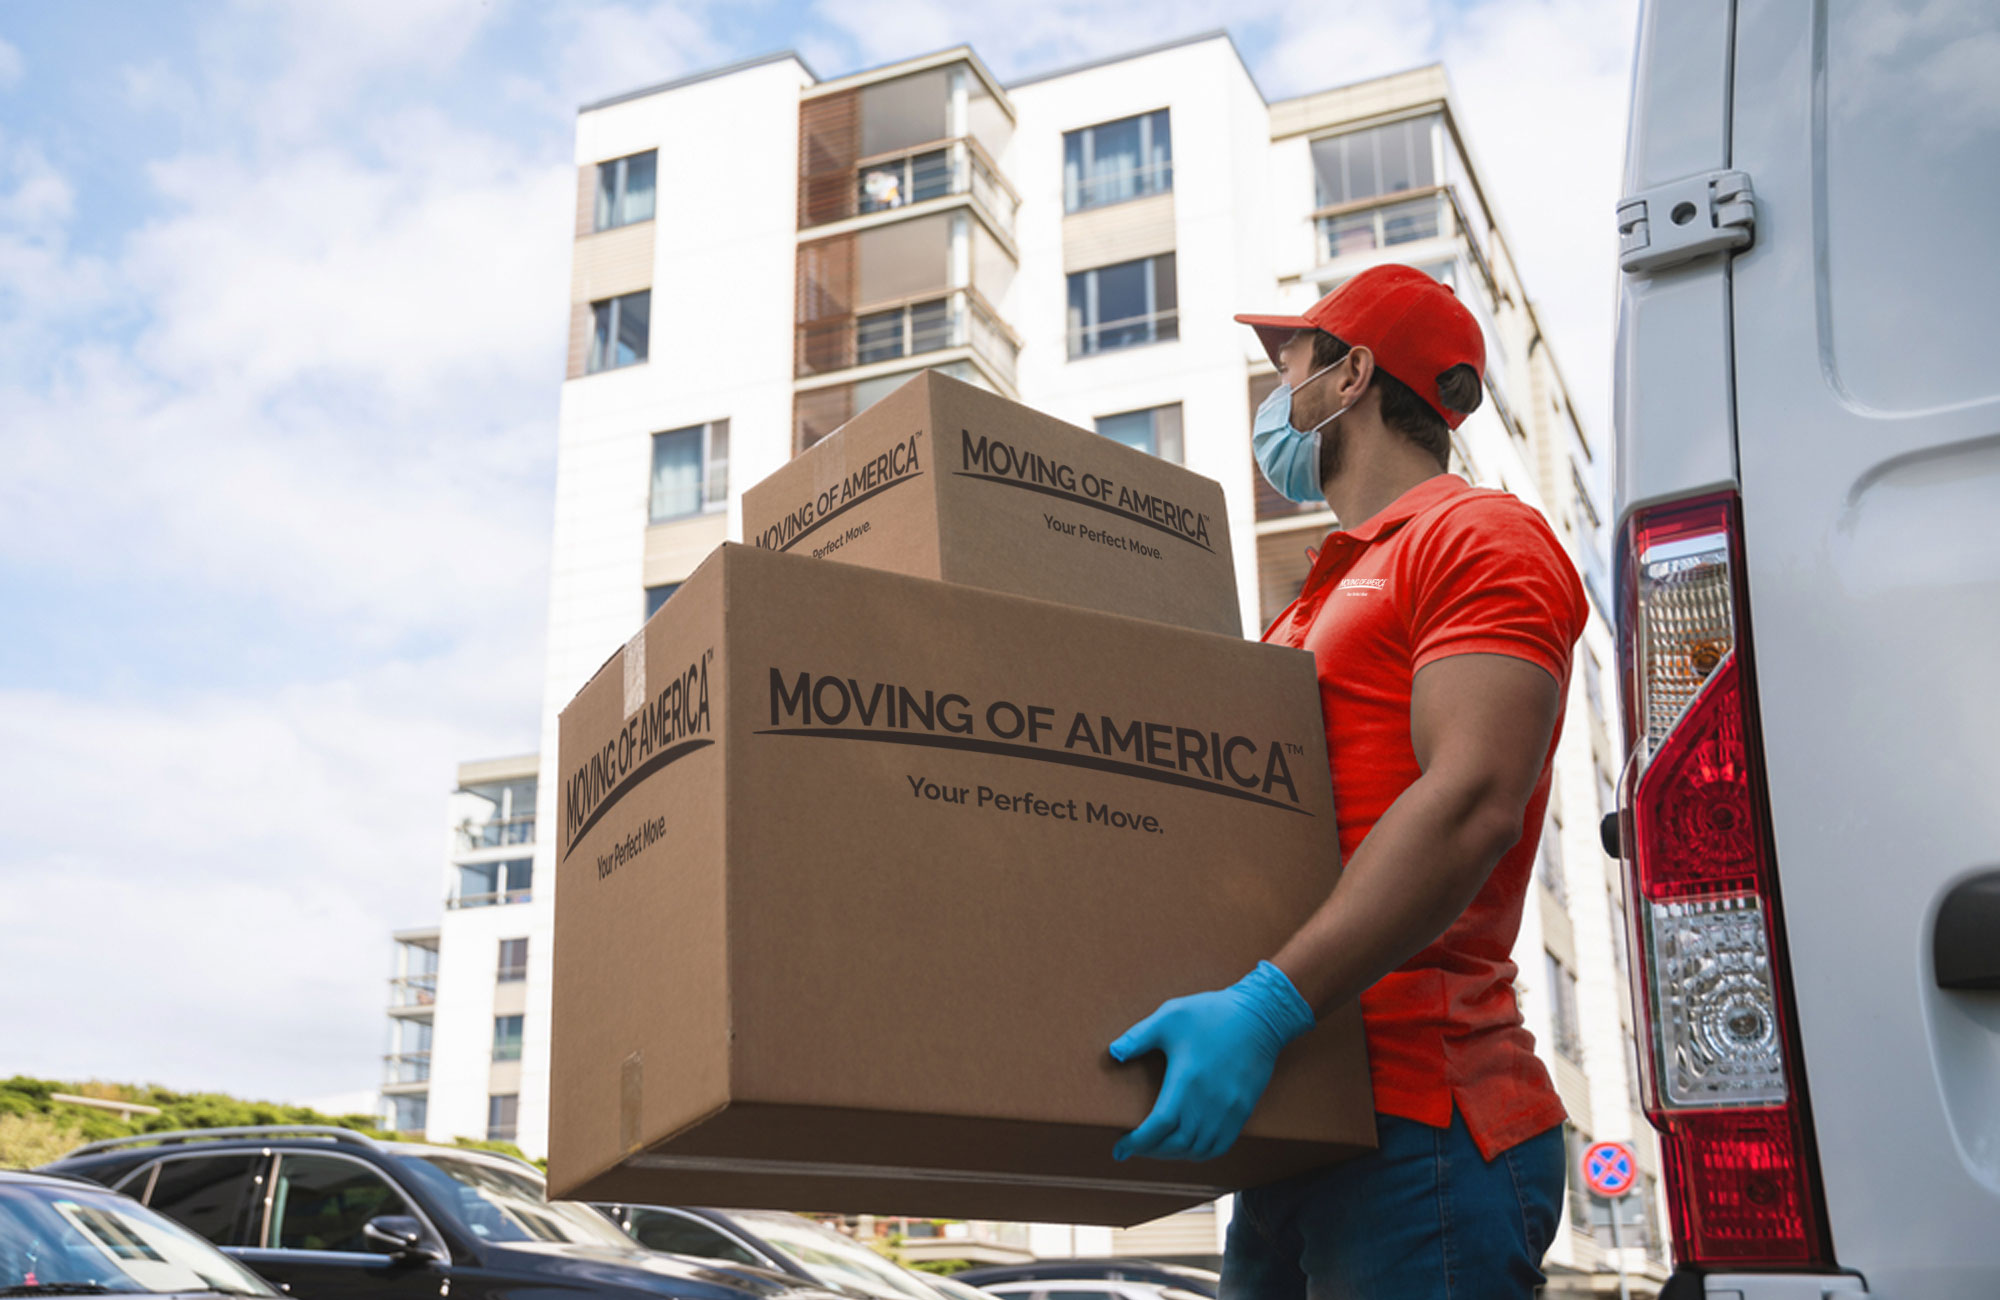 Competitive Pricing for hiring the best Wyckoff Movers to make your relocation a breeze